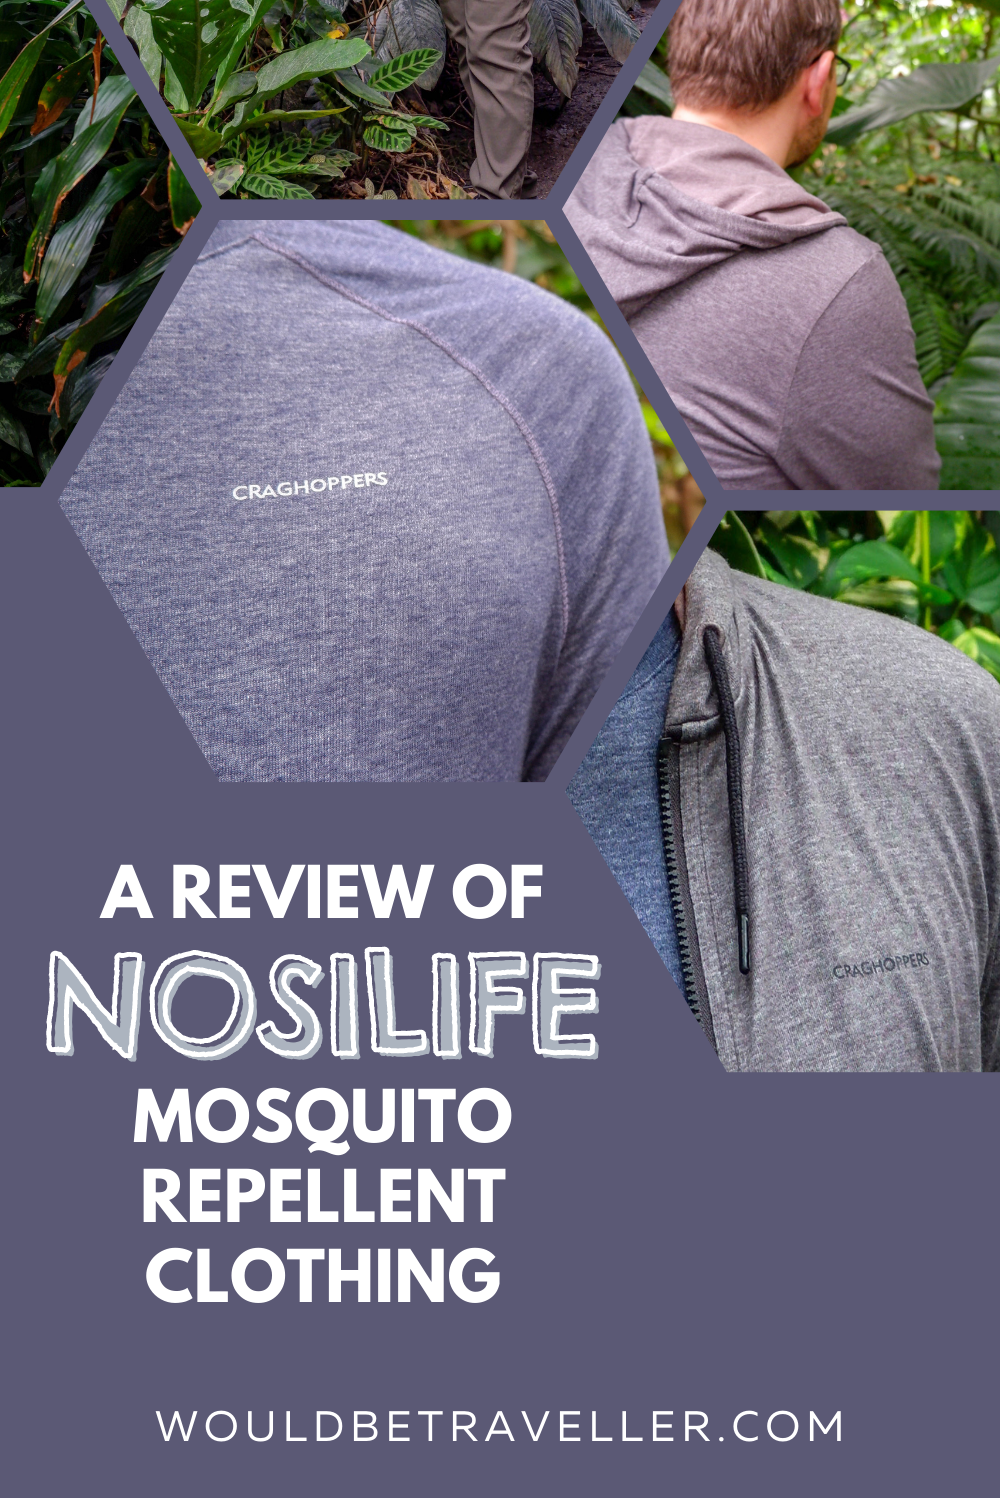 Would Be Traveller Craghoppers Nosilife Review